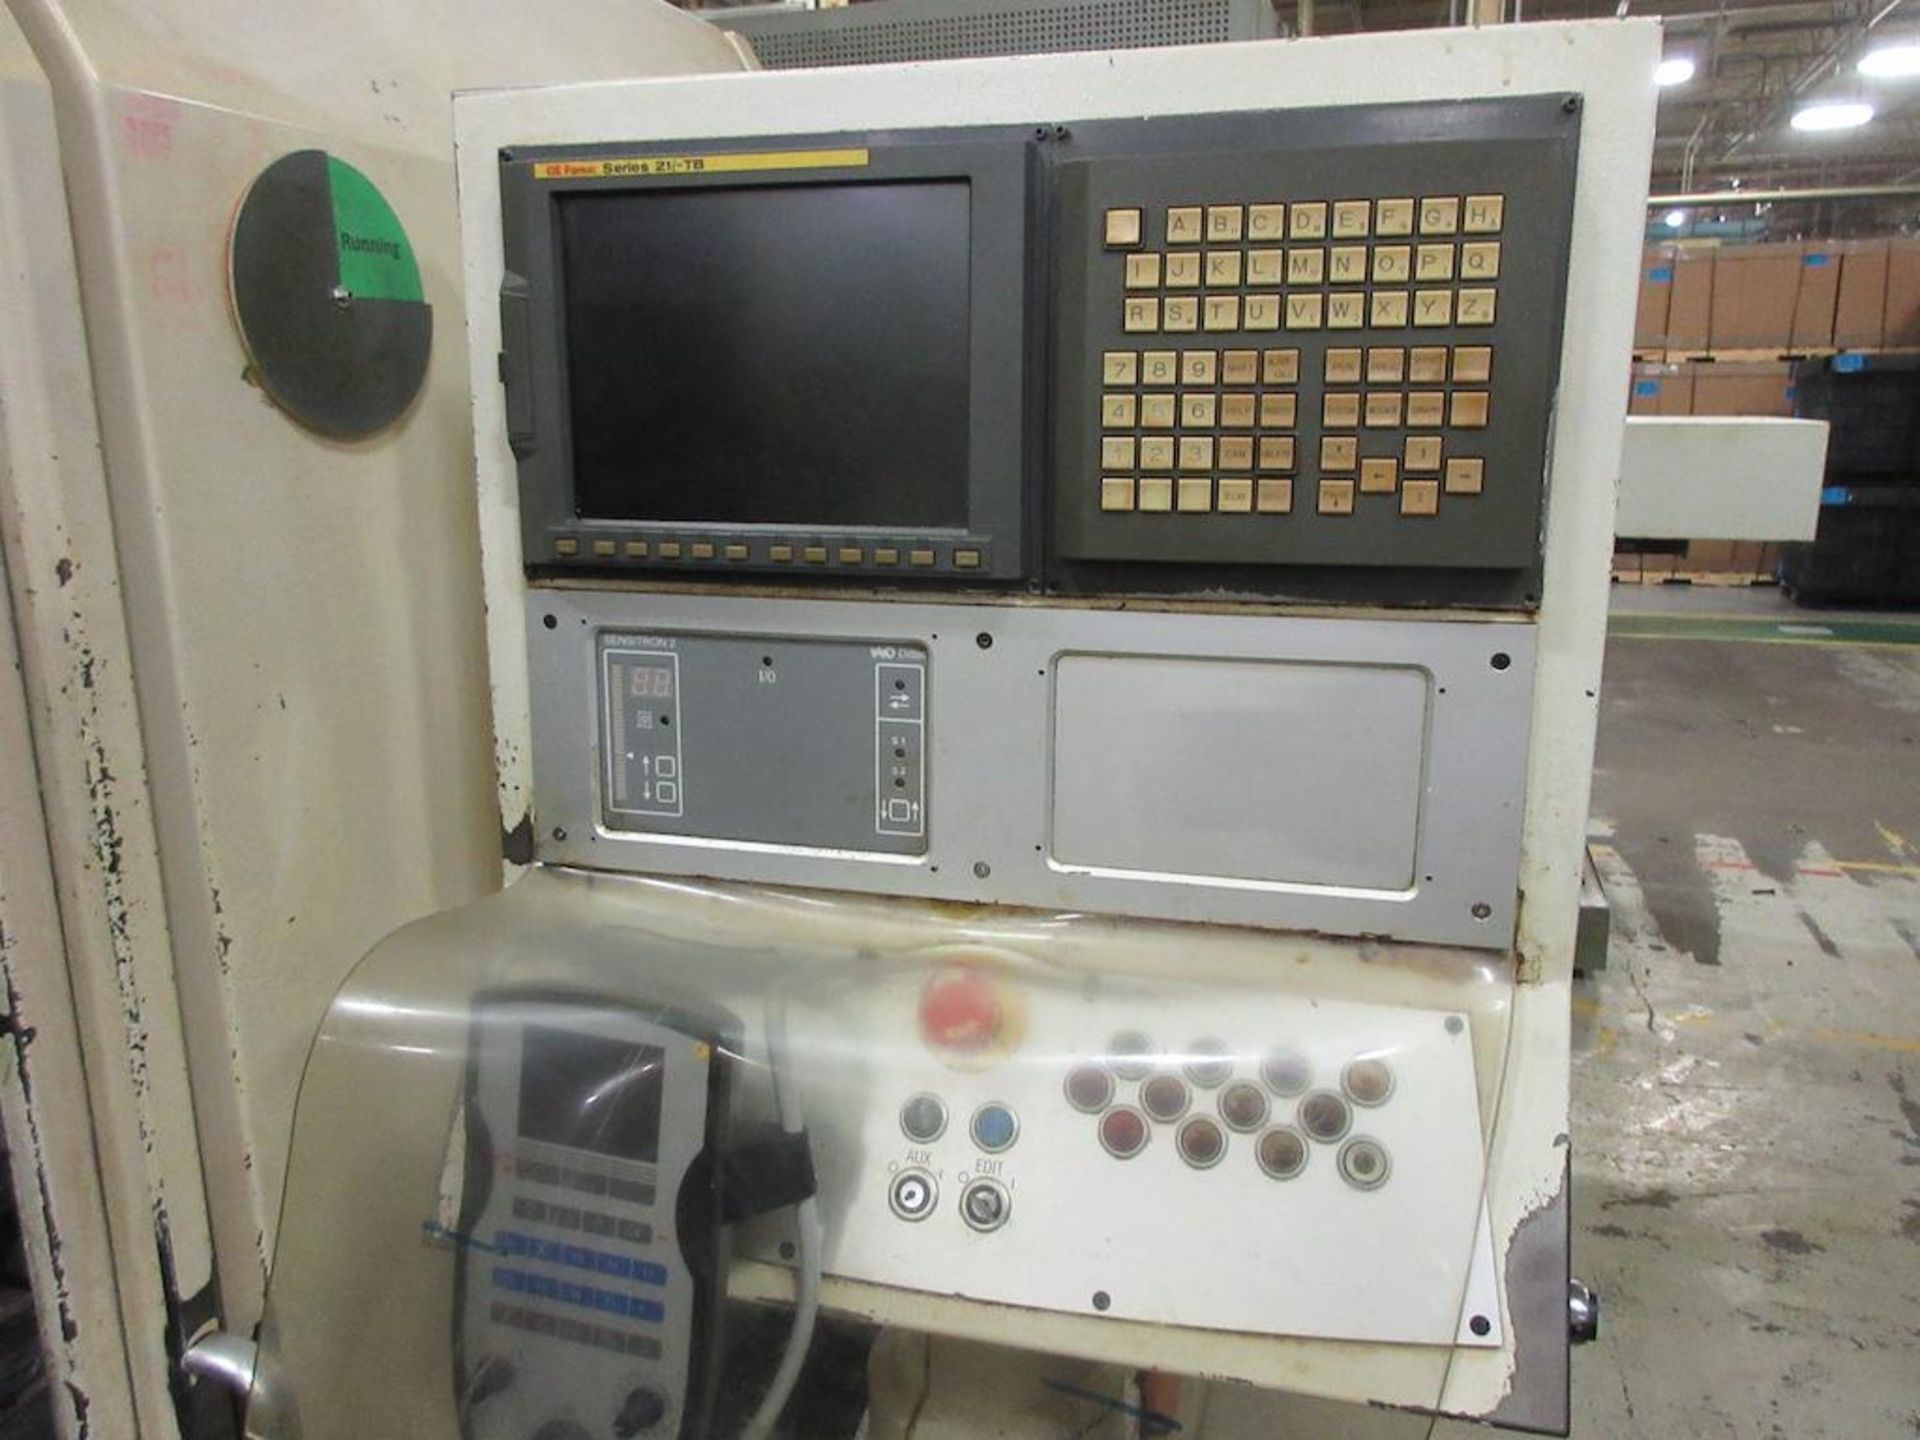 2006 STUDER, CNC Grinders, Model S151, High Frequency Drive Spindle, Swing diameter 14.17", center - Image 2 of 9